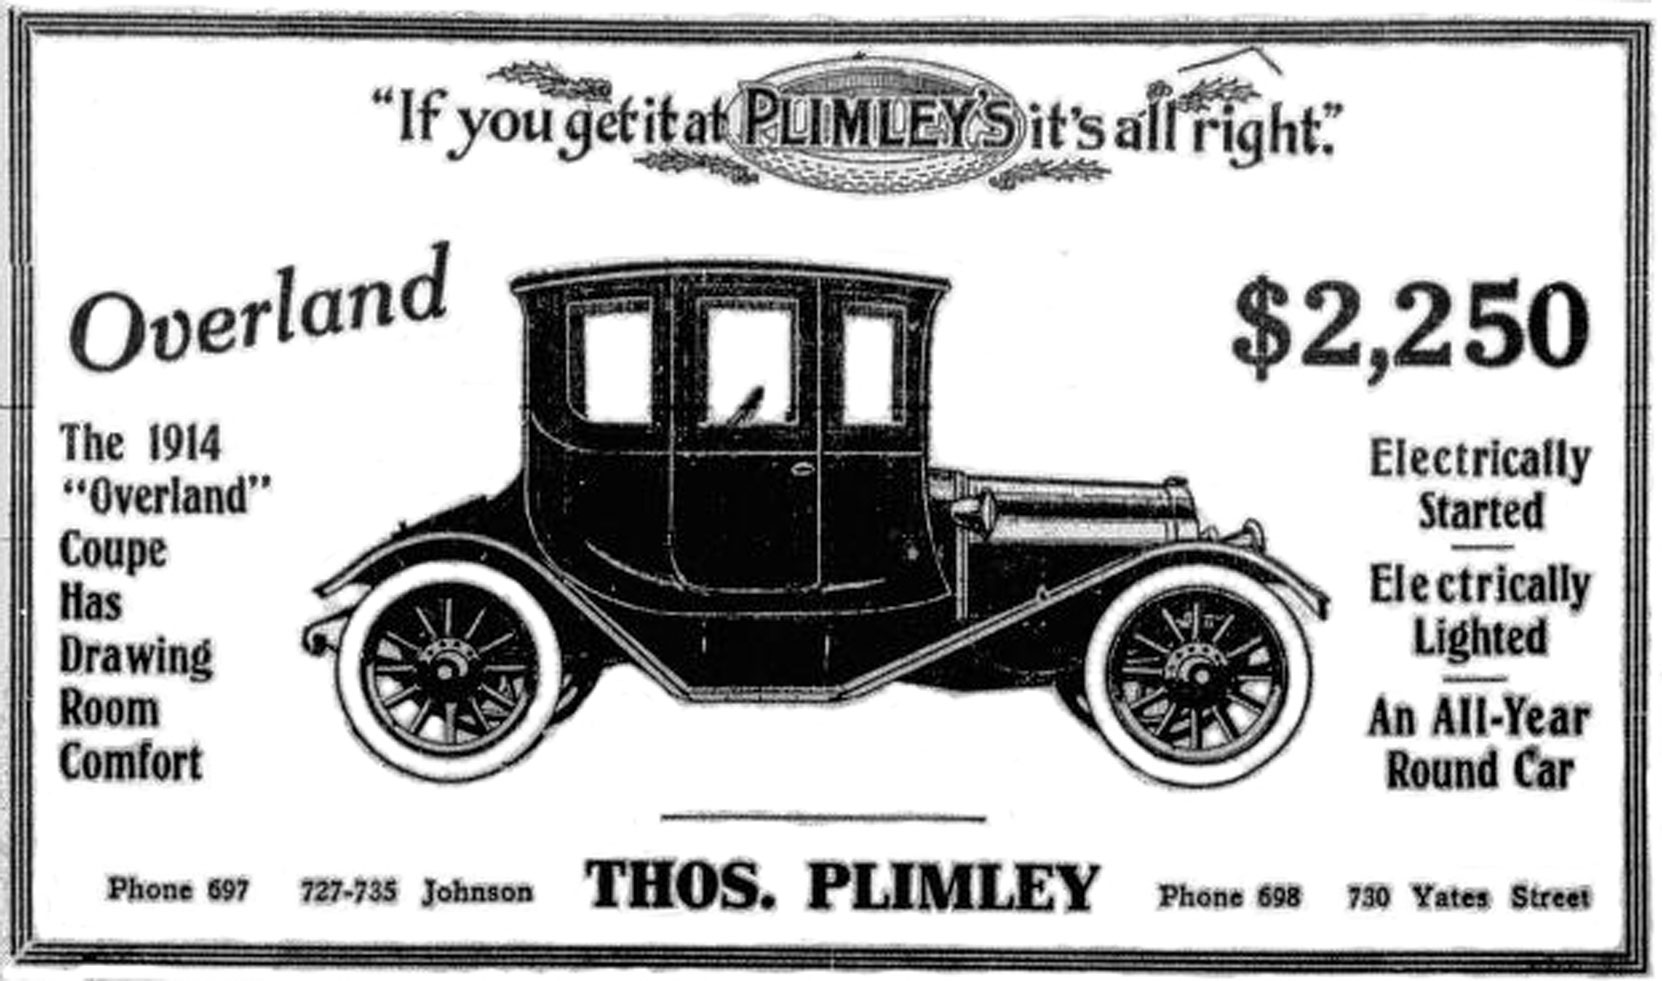 1914 advertisement for Overland Coupe, sold by Thomas Plimley Ltd., 727-731 Johnson Street and 730 Yates Street. (Victoria Online Sightseeing Tours collection)